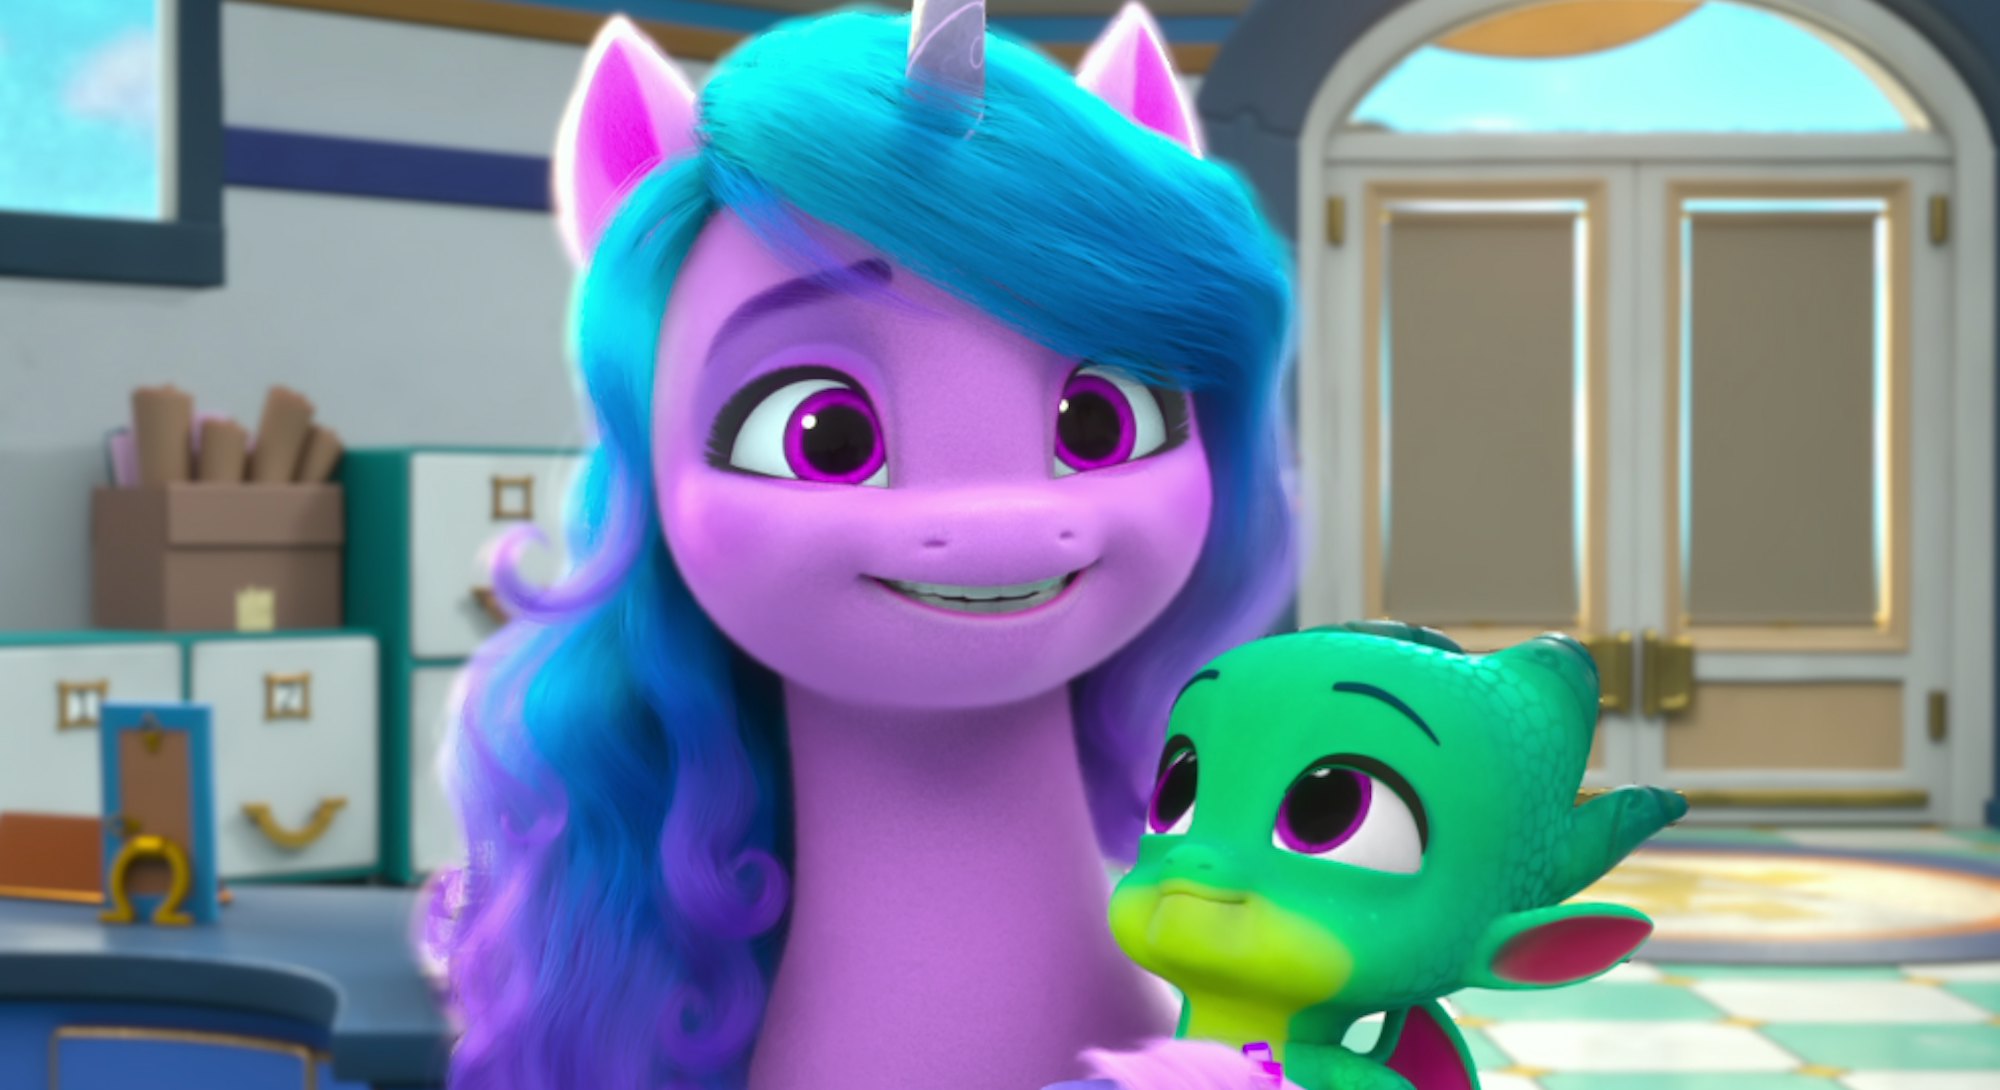 A unicorn from My Little Pony holds a baby dragon.